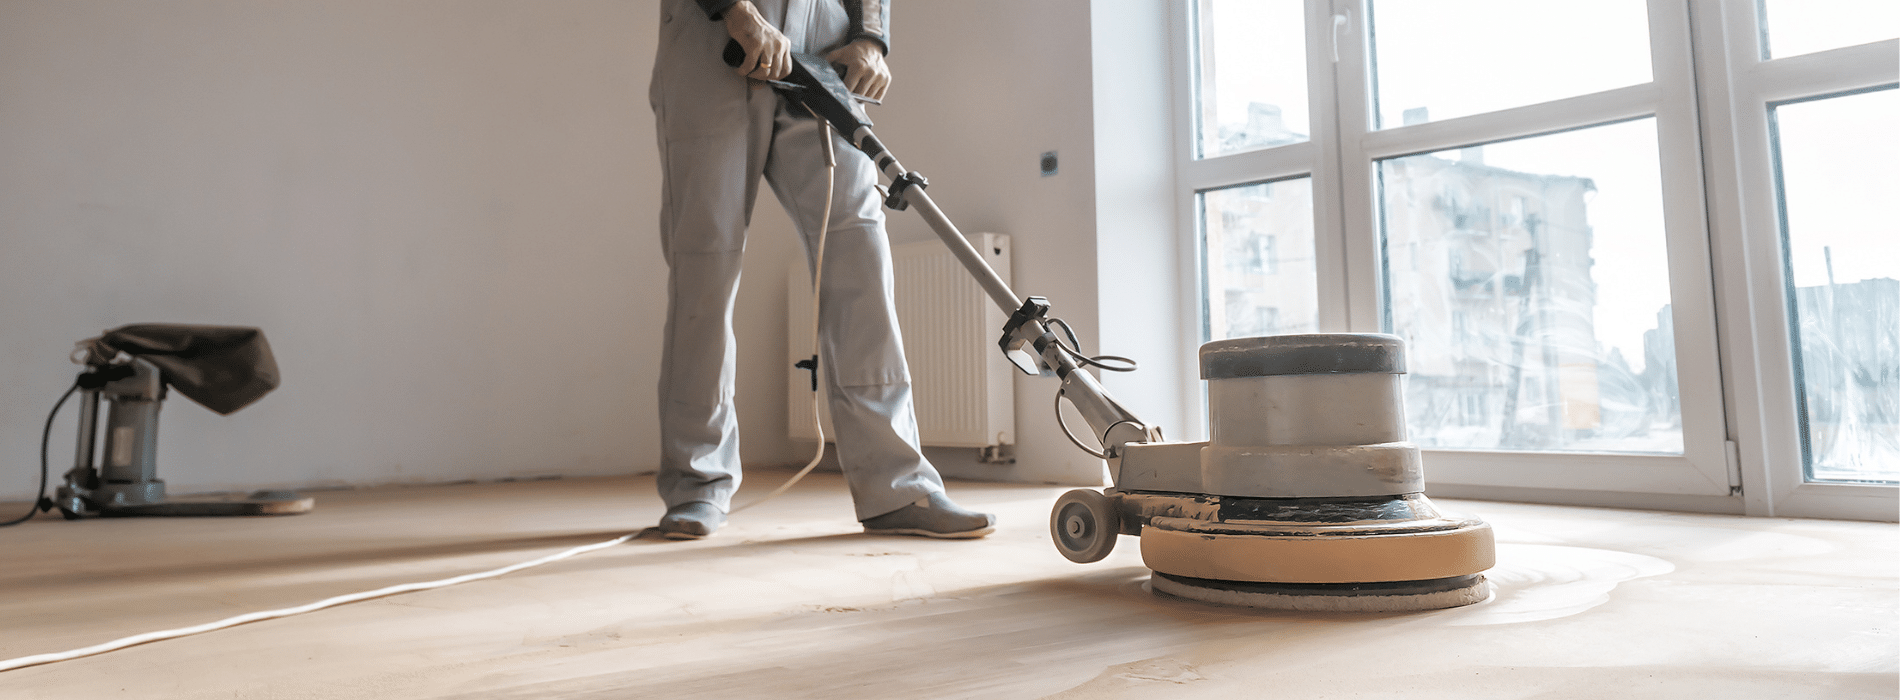 Mr Sander® employing a sander on parquet floor in Grove Park, SE12 with powerful Effect 2200 voltage 240 Bona buffer sander. The equipment is connected to a dust extraction system with a HEPA filter, ensuring a clean and efficient process.